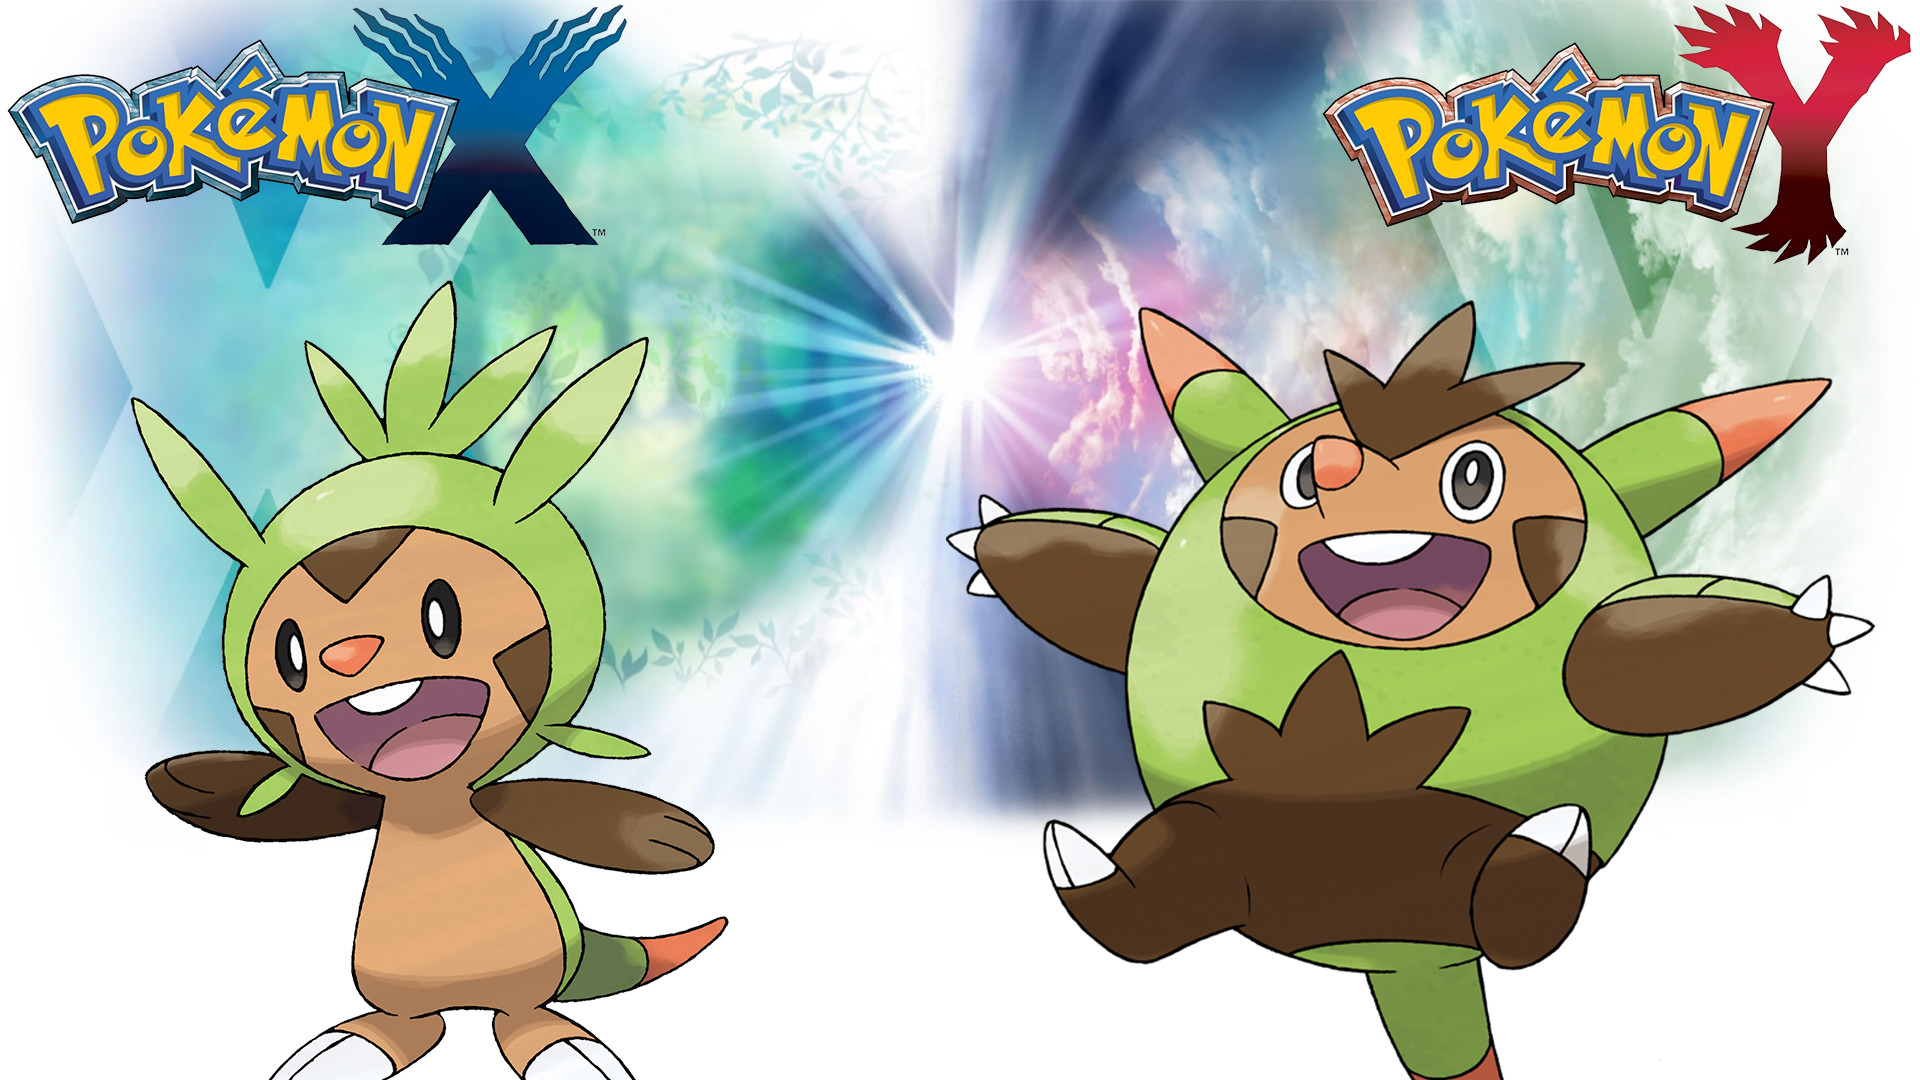 1920x1080 ... Pokemon X Y - Wallpaper - Chespin and Quilladin by Thelimomon